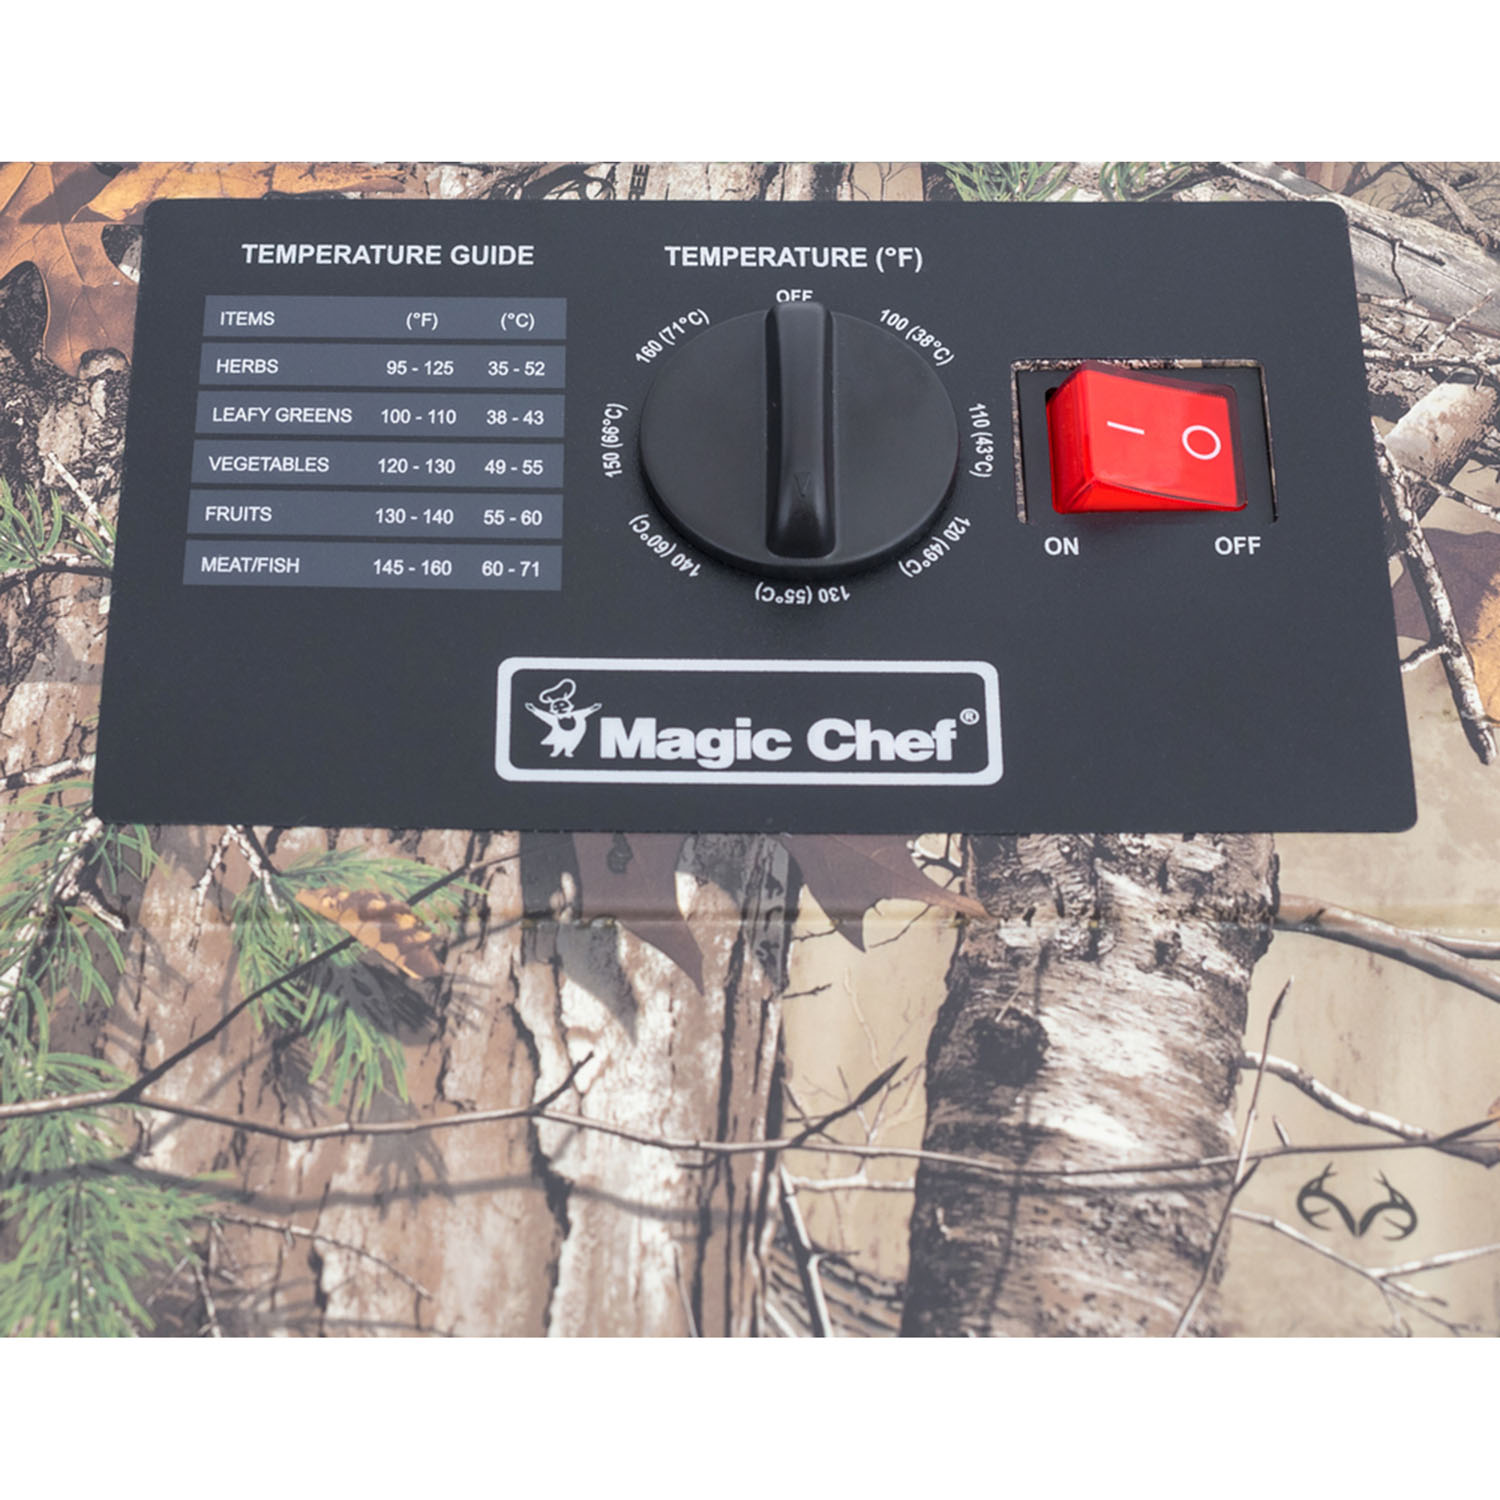 Magic Chef 10-Tray Food Dehydrator with Authentic Realtree Xtra Camouflage Pattern - image 5 of 5